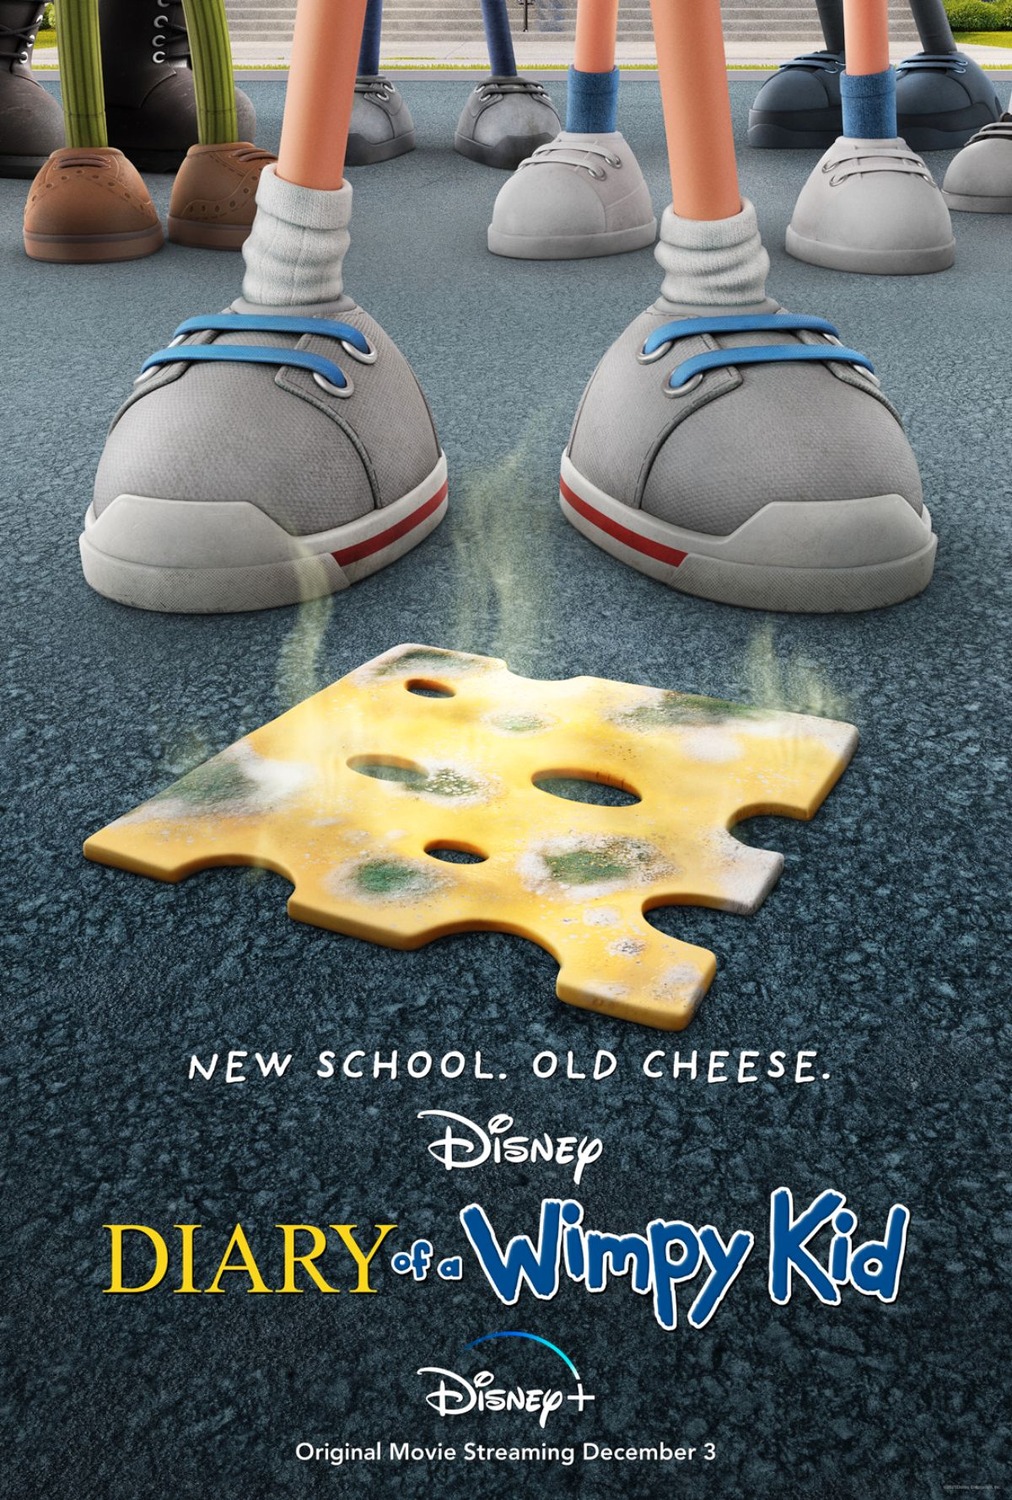 Extra Large Movie Poster Image for Diary of a Wimpy Kid (#1 of 2)